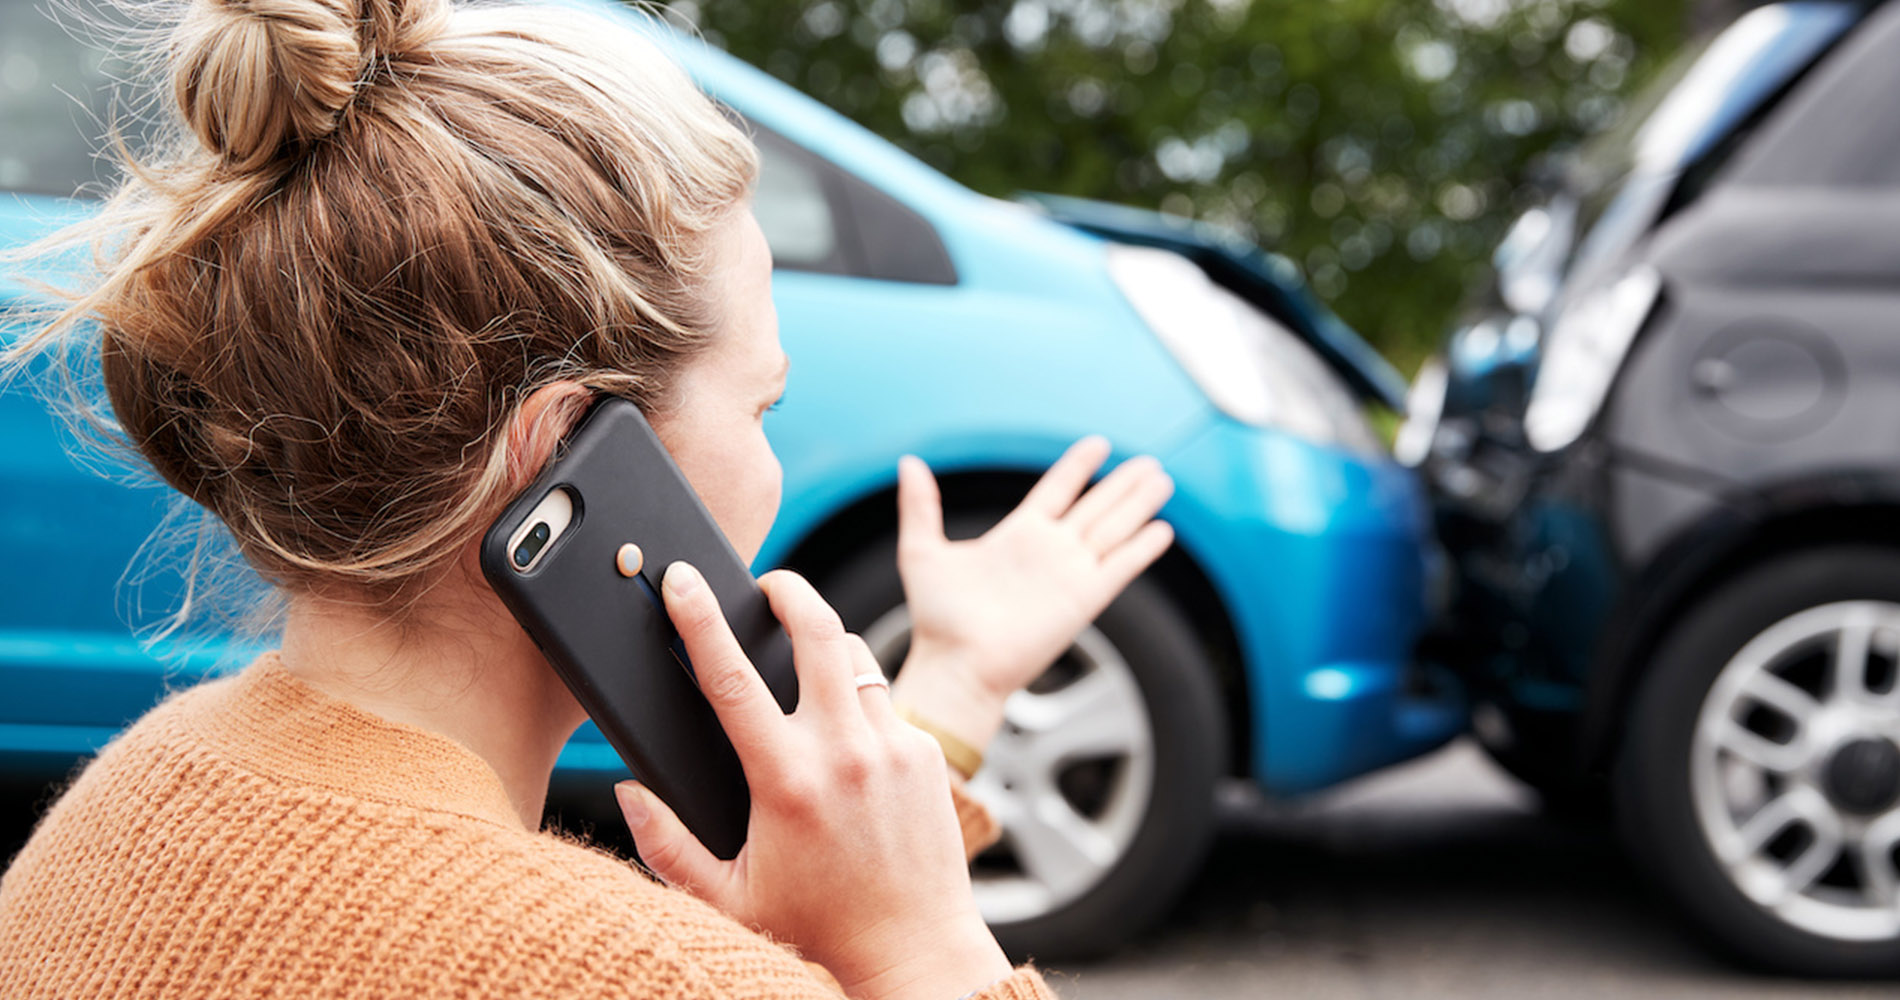 Woman on her cellphone after accident